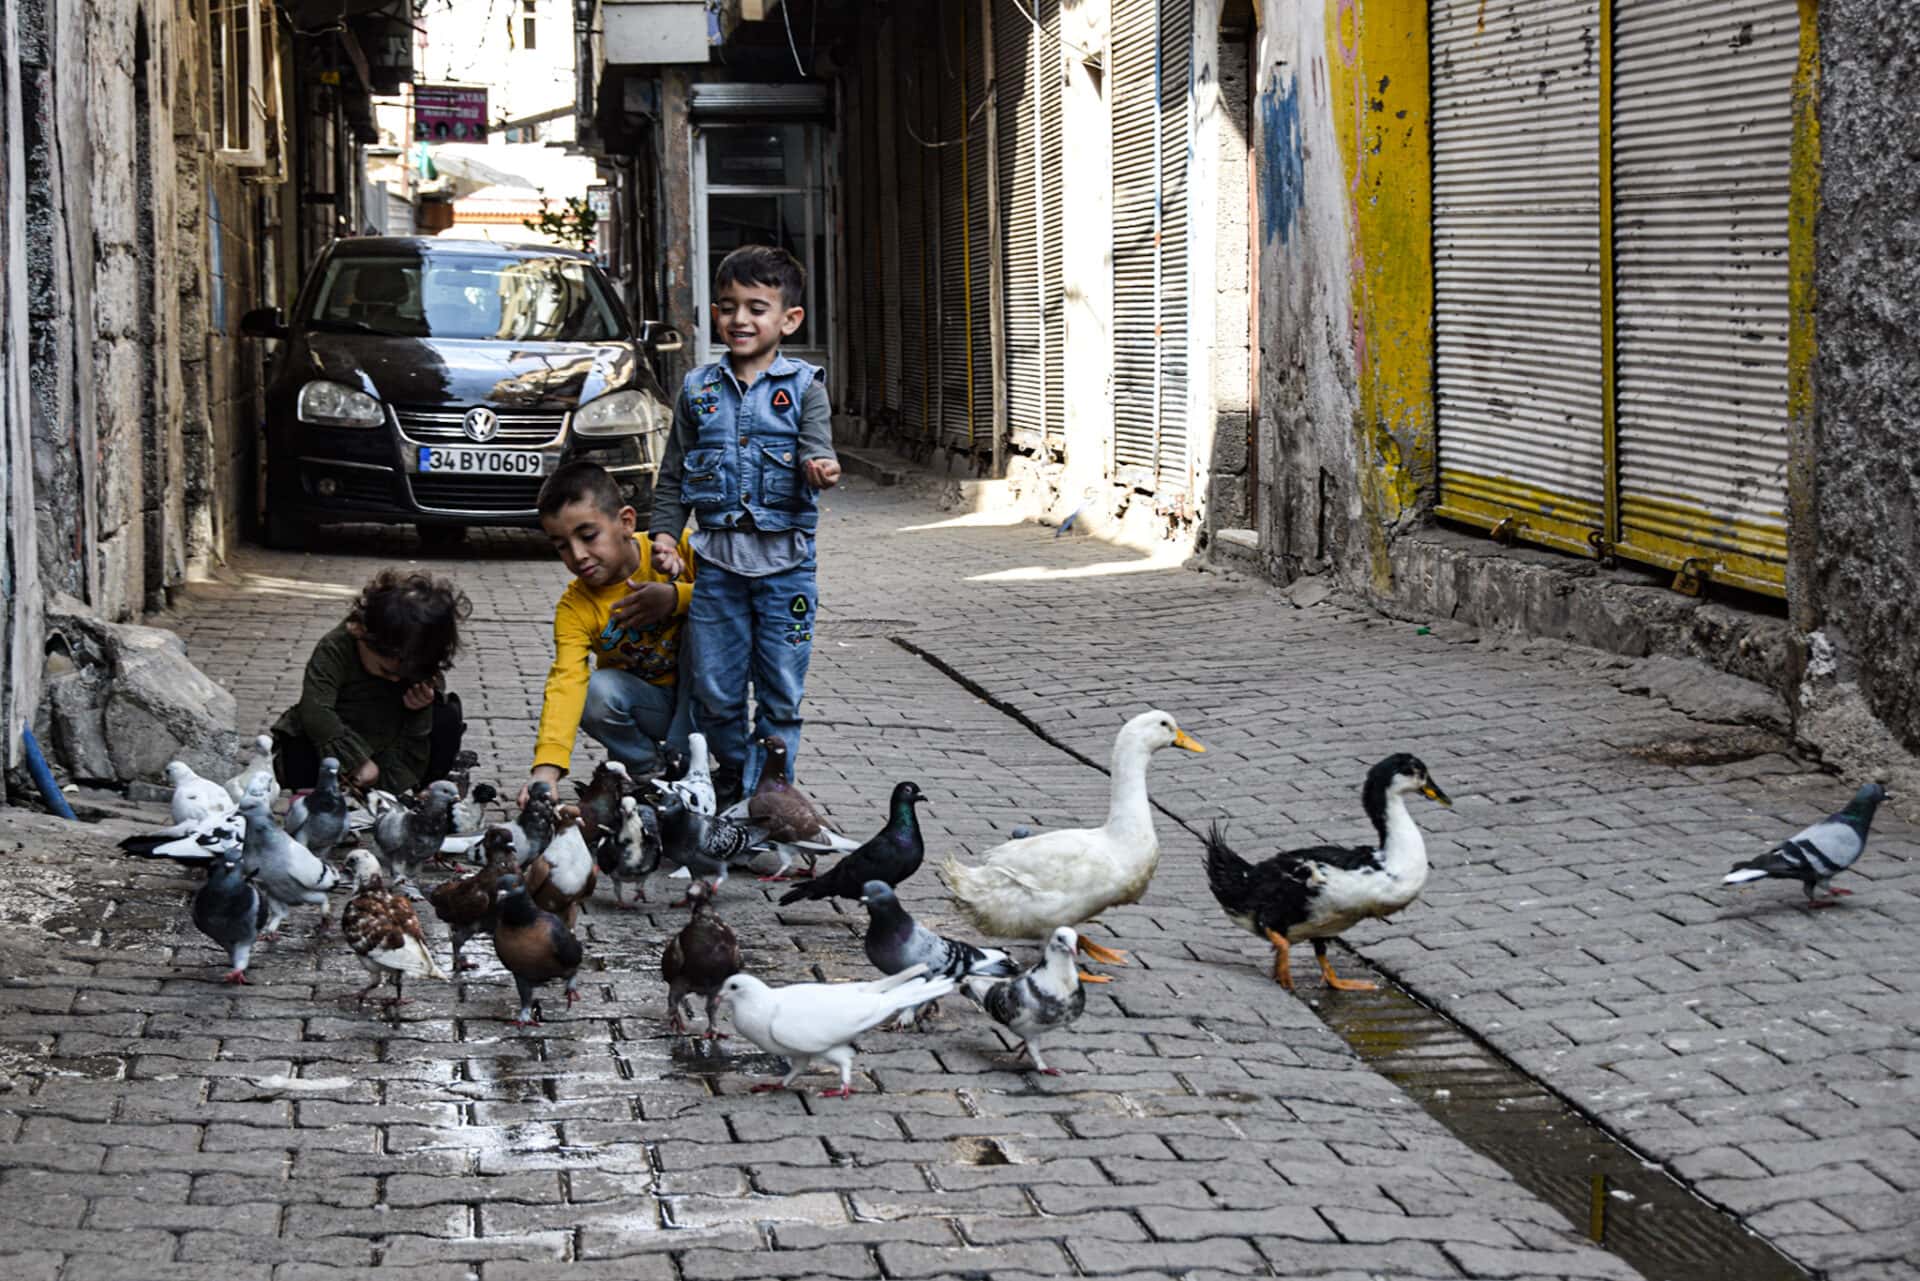 children feed a bunch of pigeons and two geese on a coobled street in Diyarbakir's old town